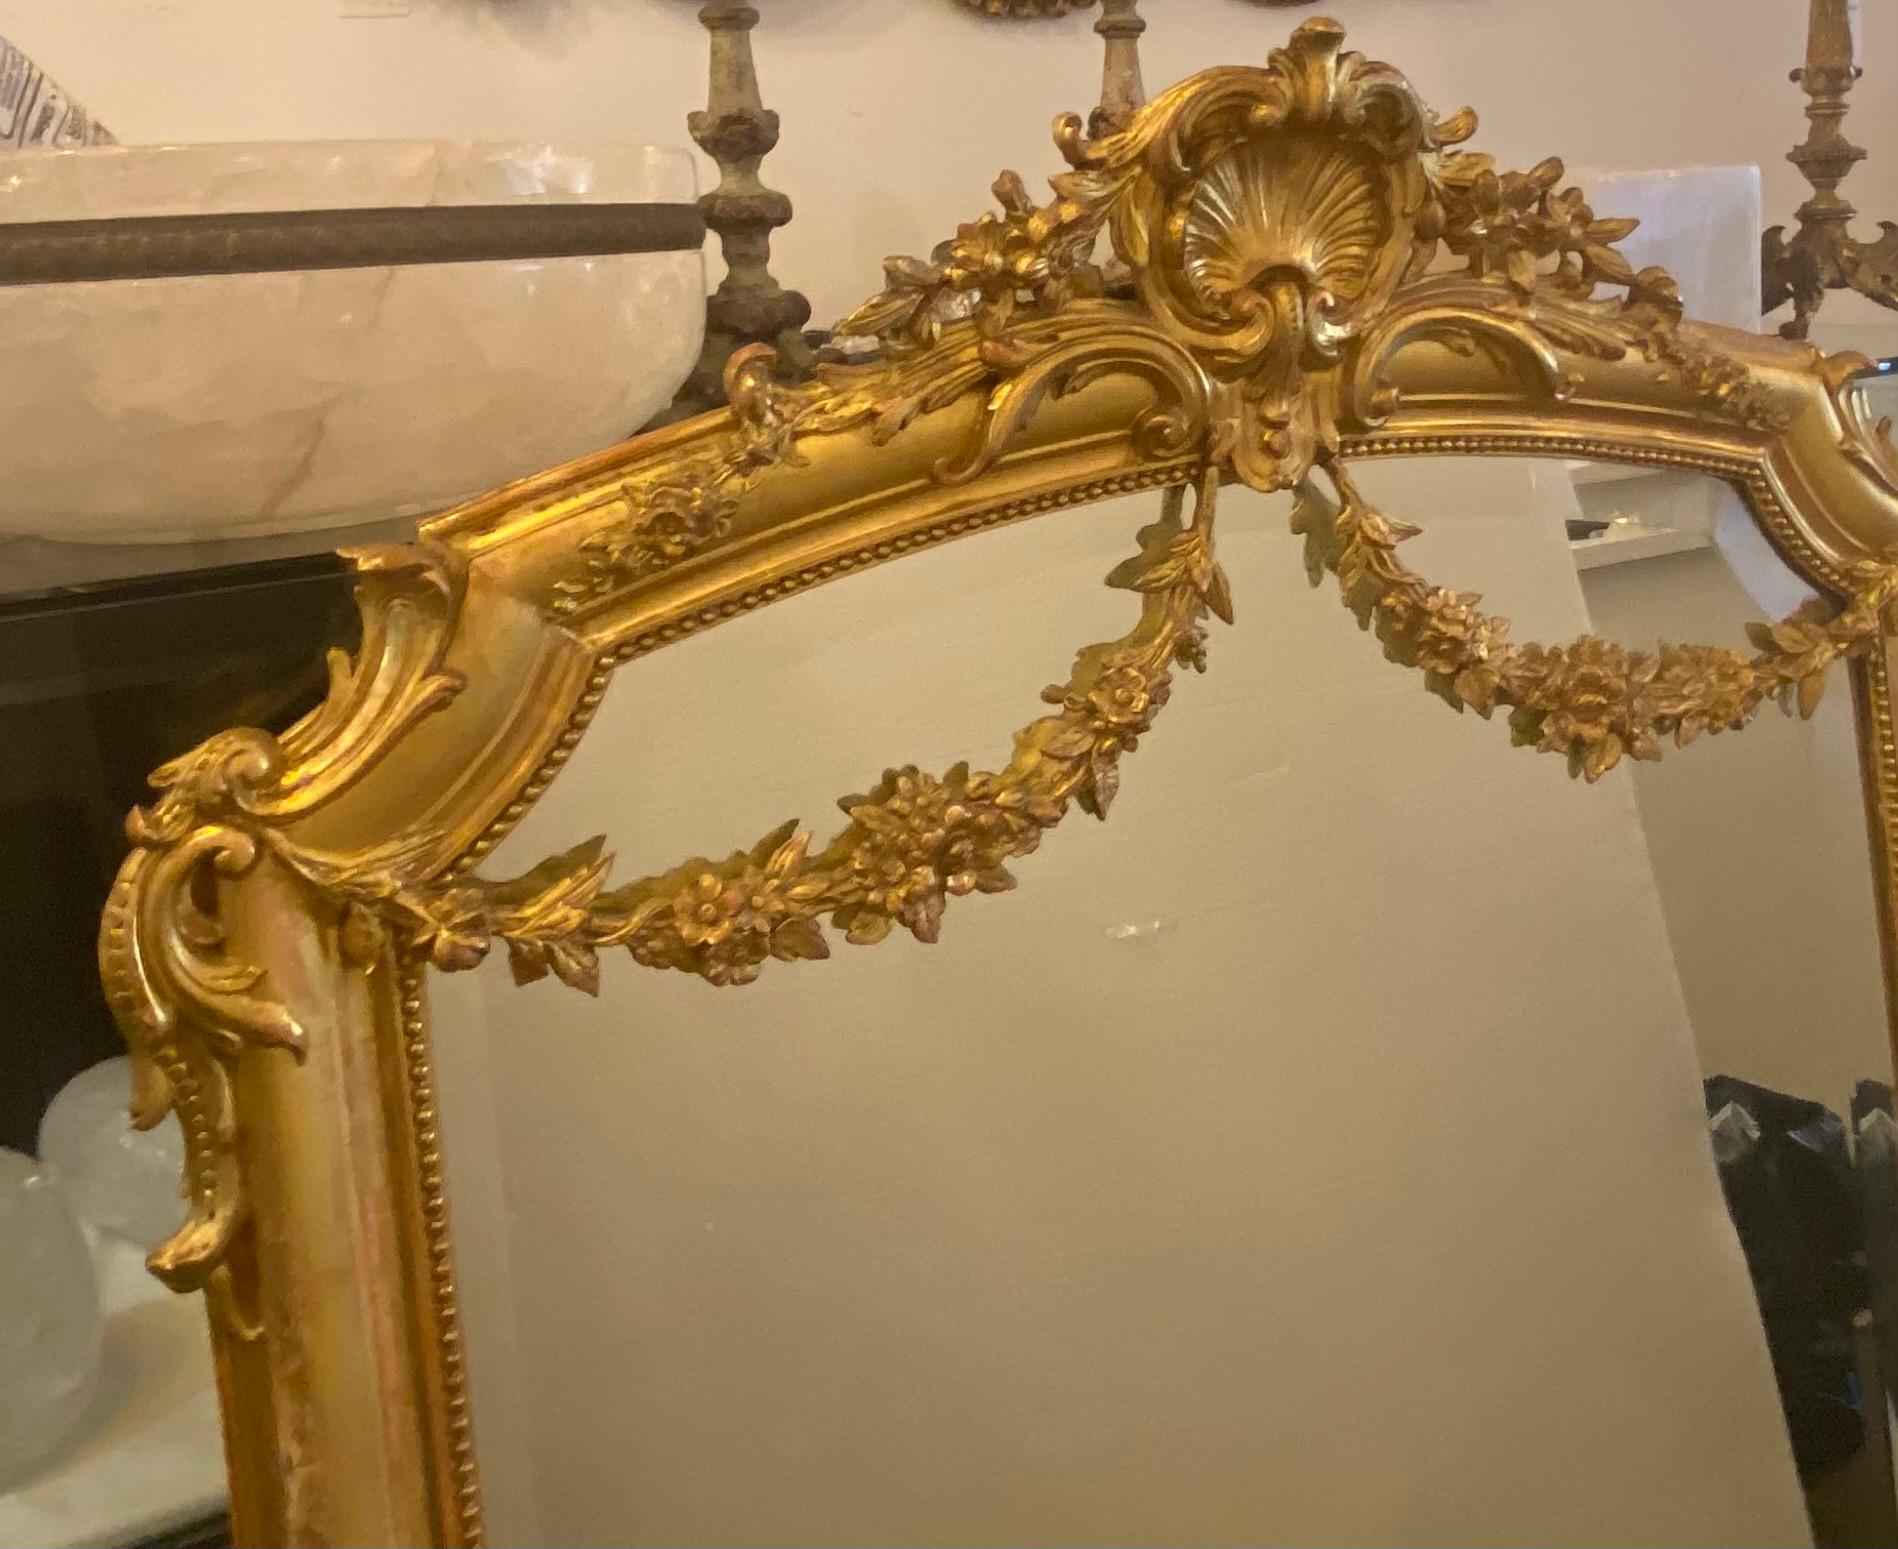 Fine antique neoclassical giltwood mirror. Elaborate scrolled and foliate decoration in rich gold leaf over wood. Good overall condition with minor wear. Some restoration to upper finial.